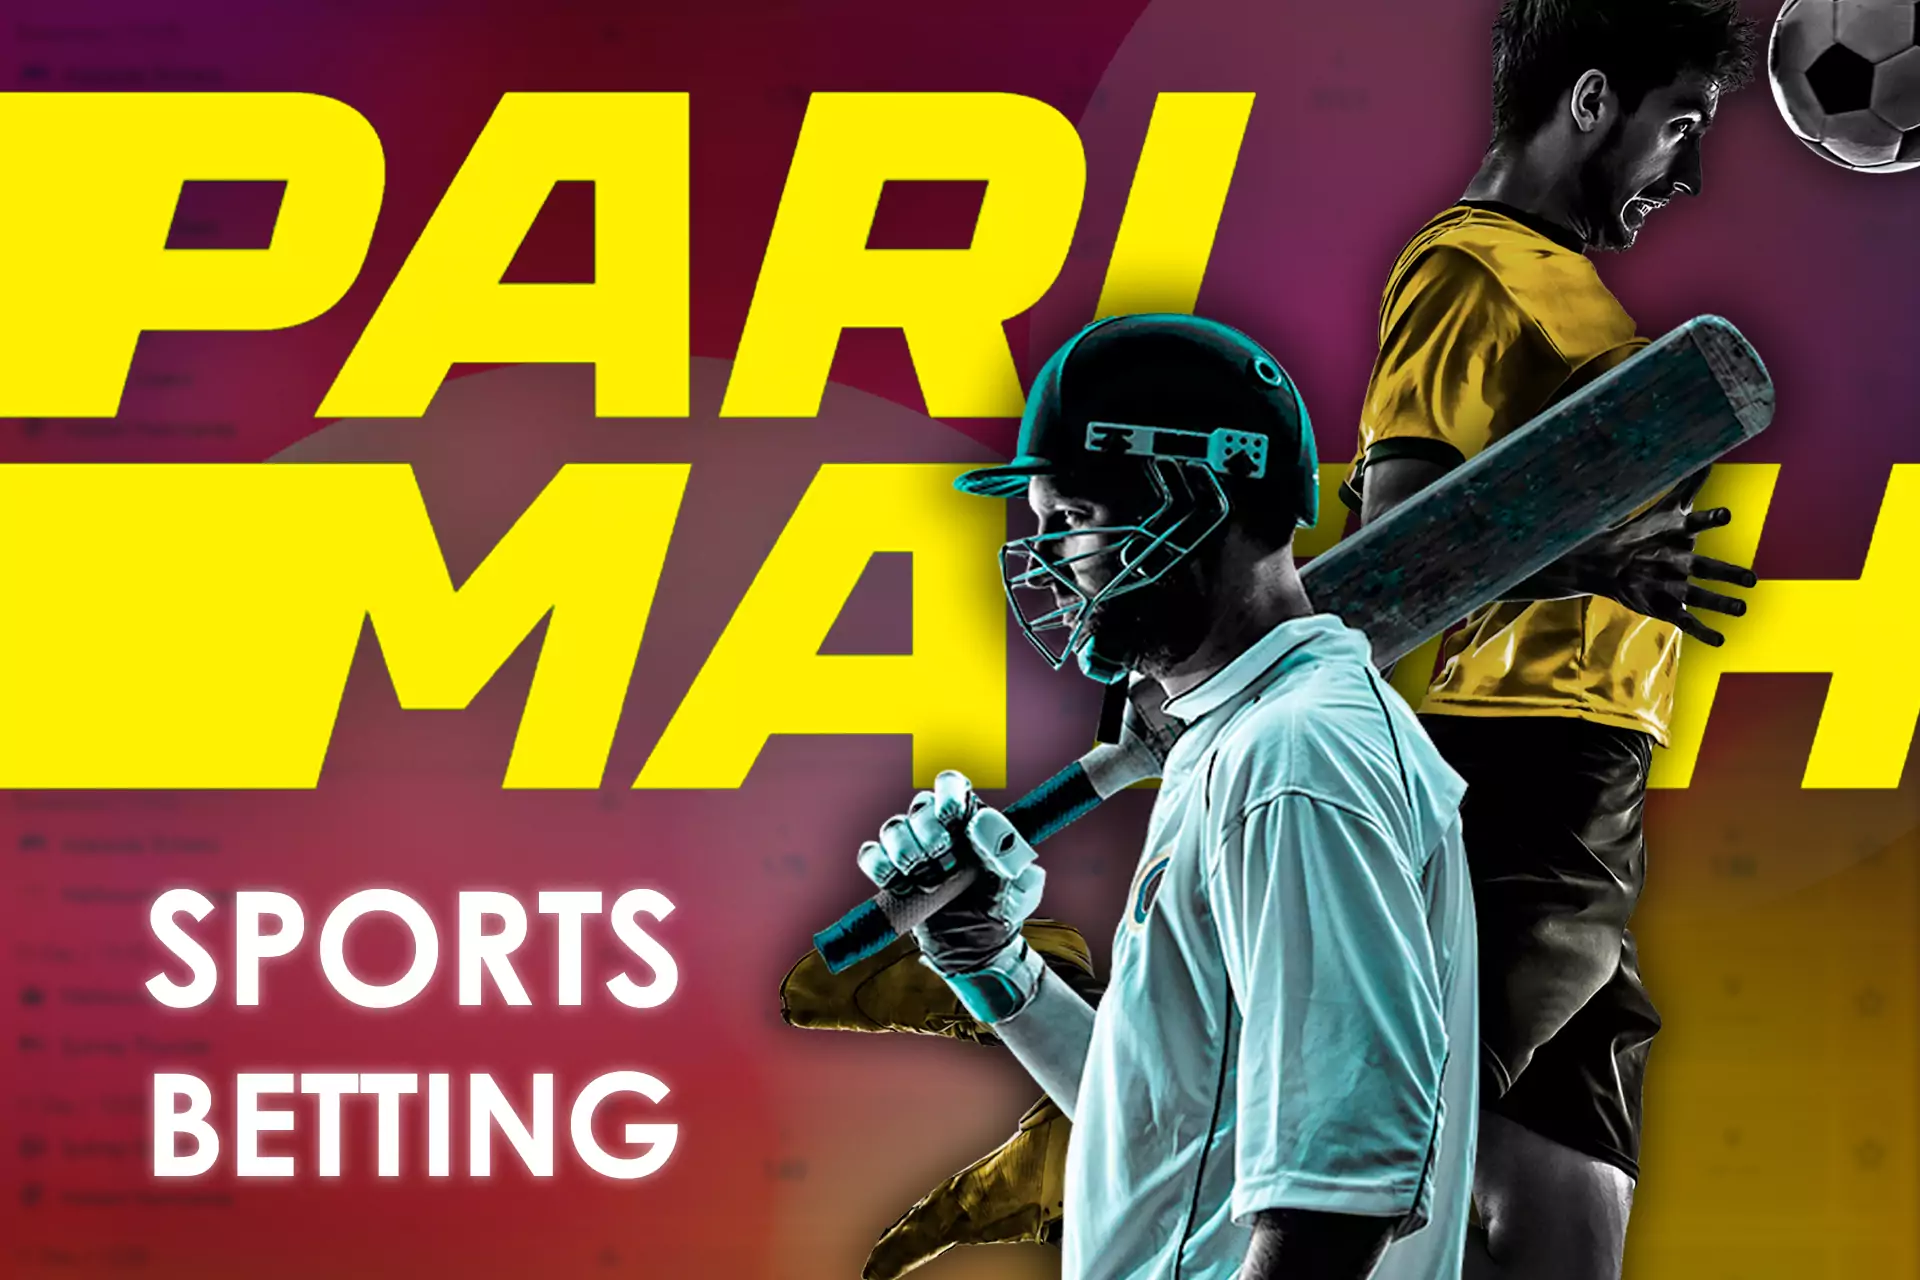 If you are also an eager fan of watching sports matches, you can place bets using your Parimatch account as well.